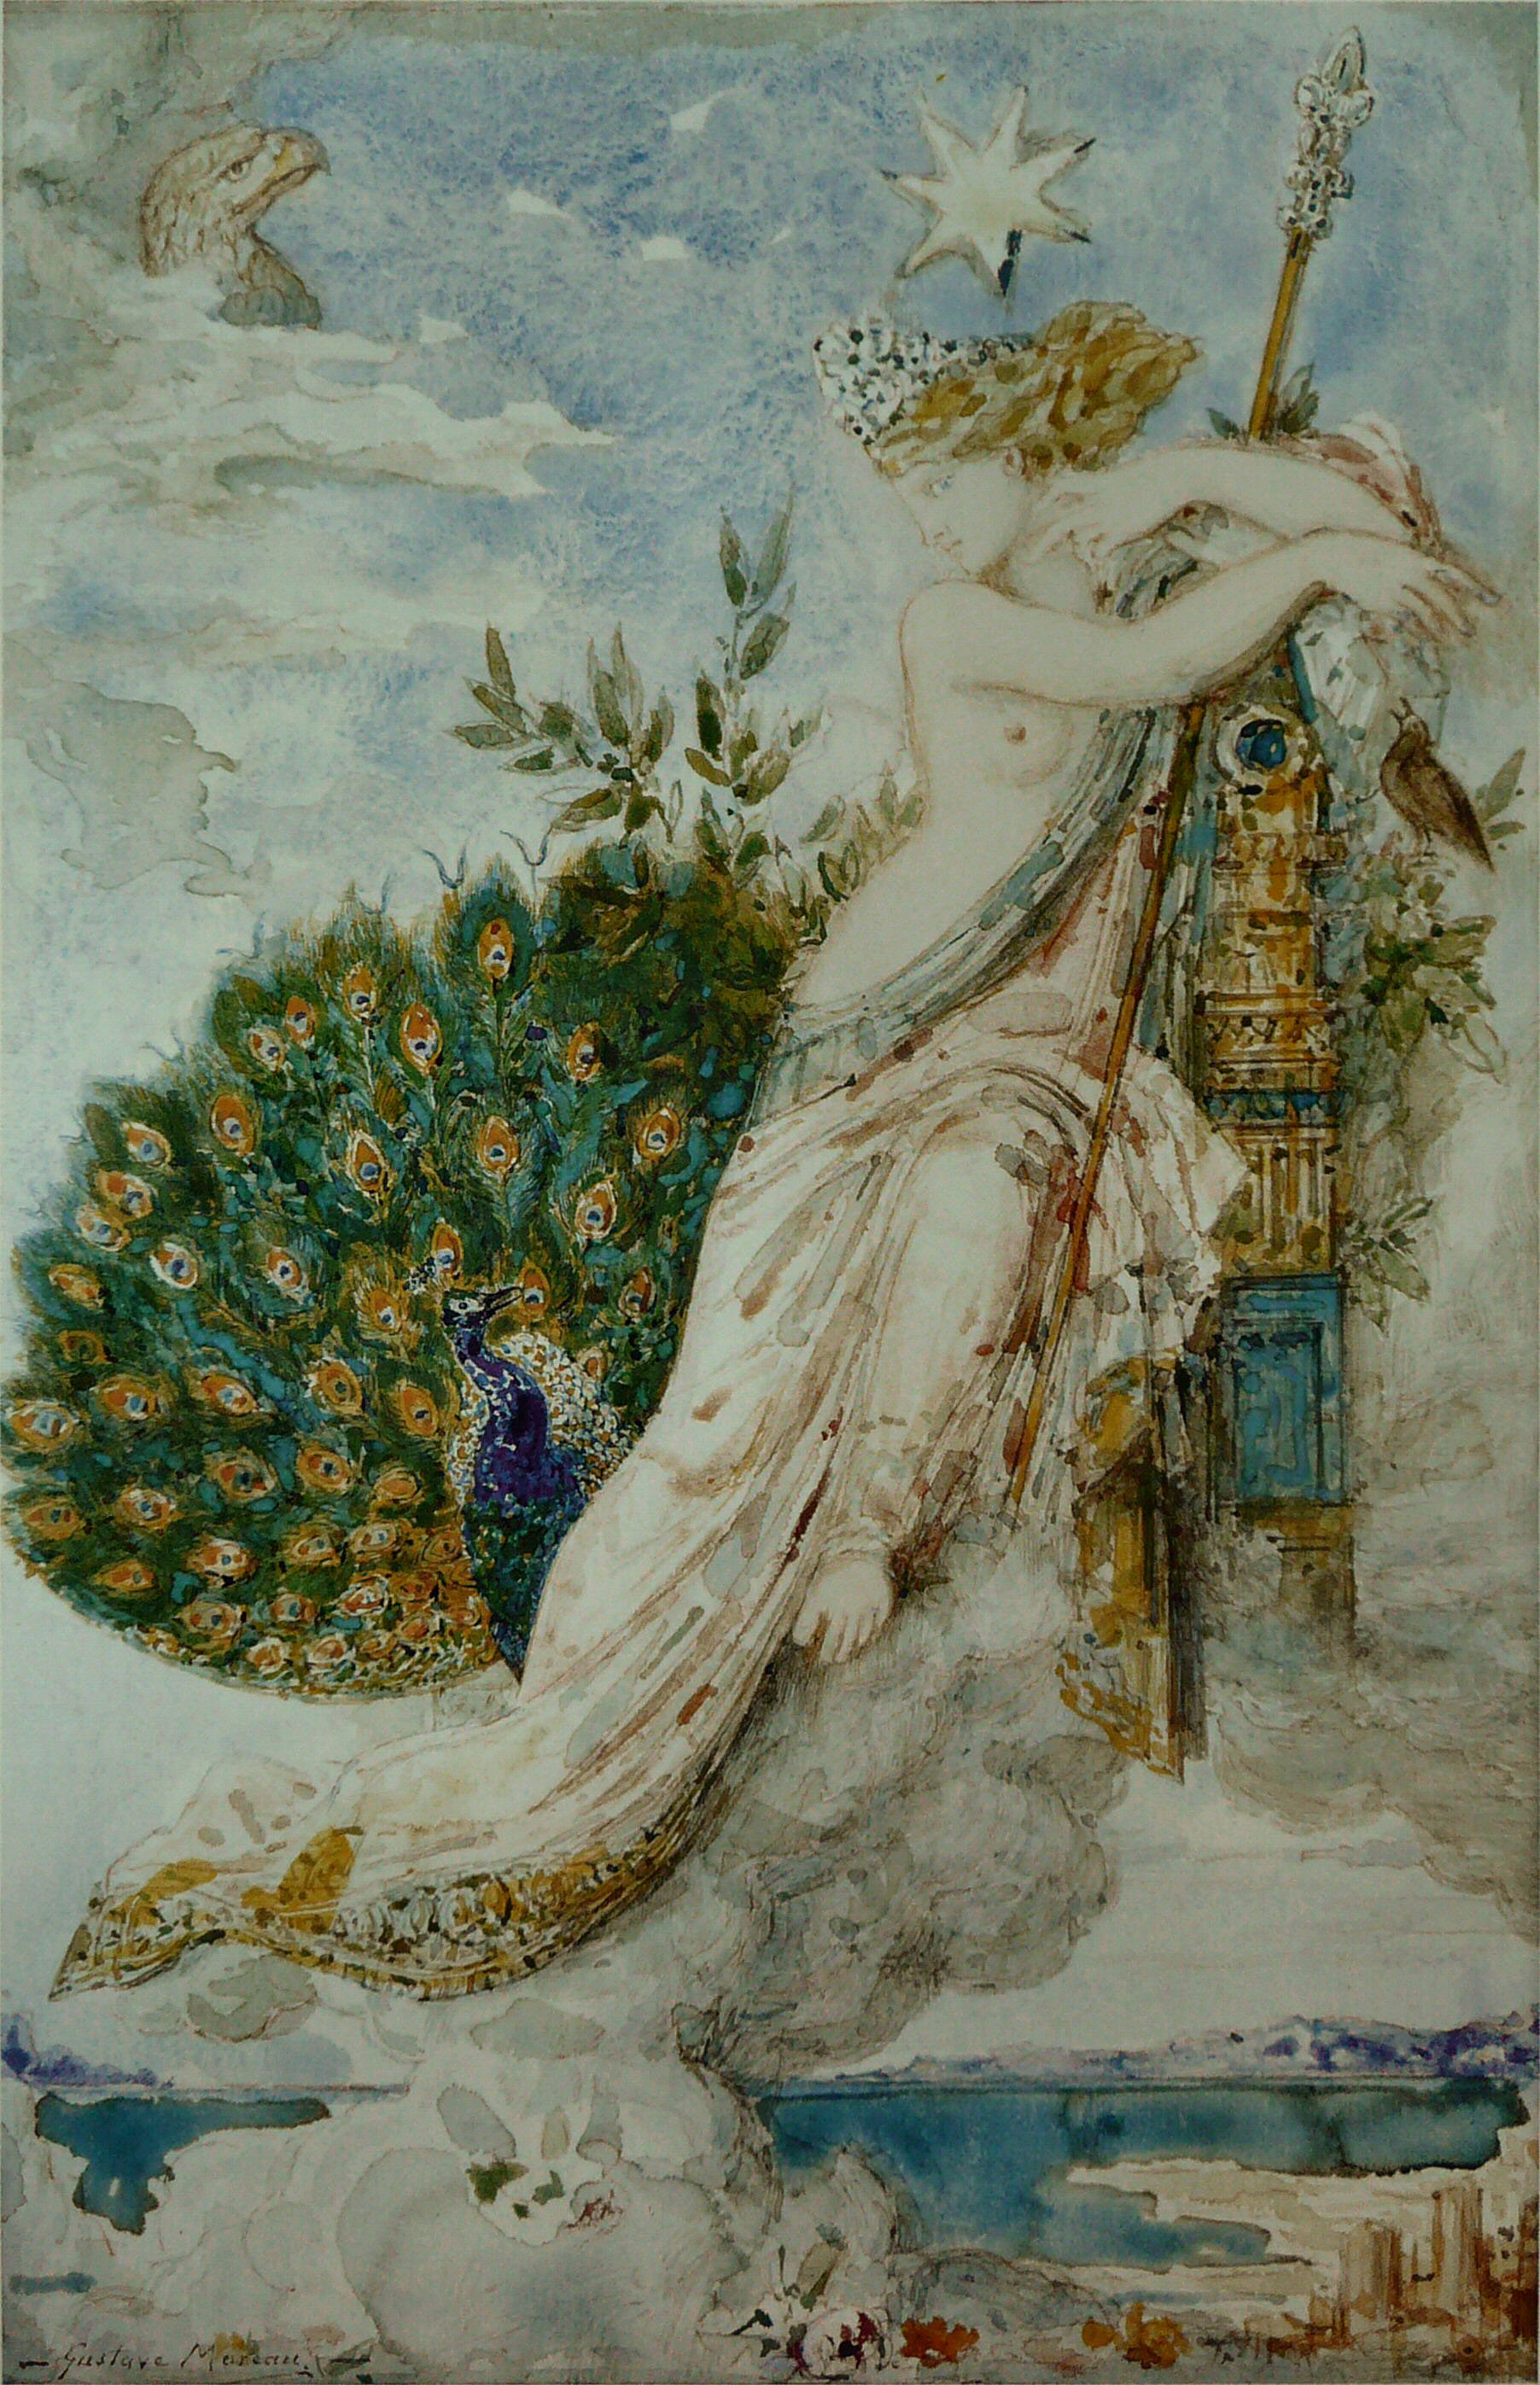 The Peacock Complaining to Juno by Gustave Moreau - 1881 - 31 x 21 cm Musée national Gustave Moreau